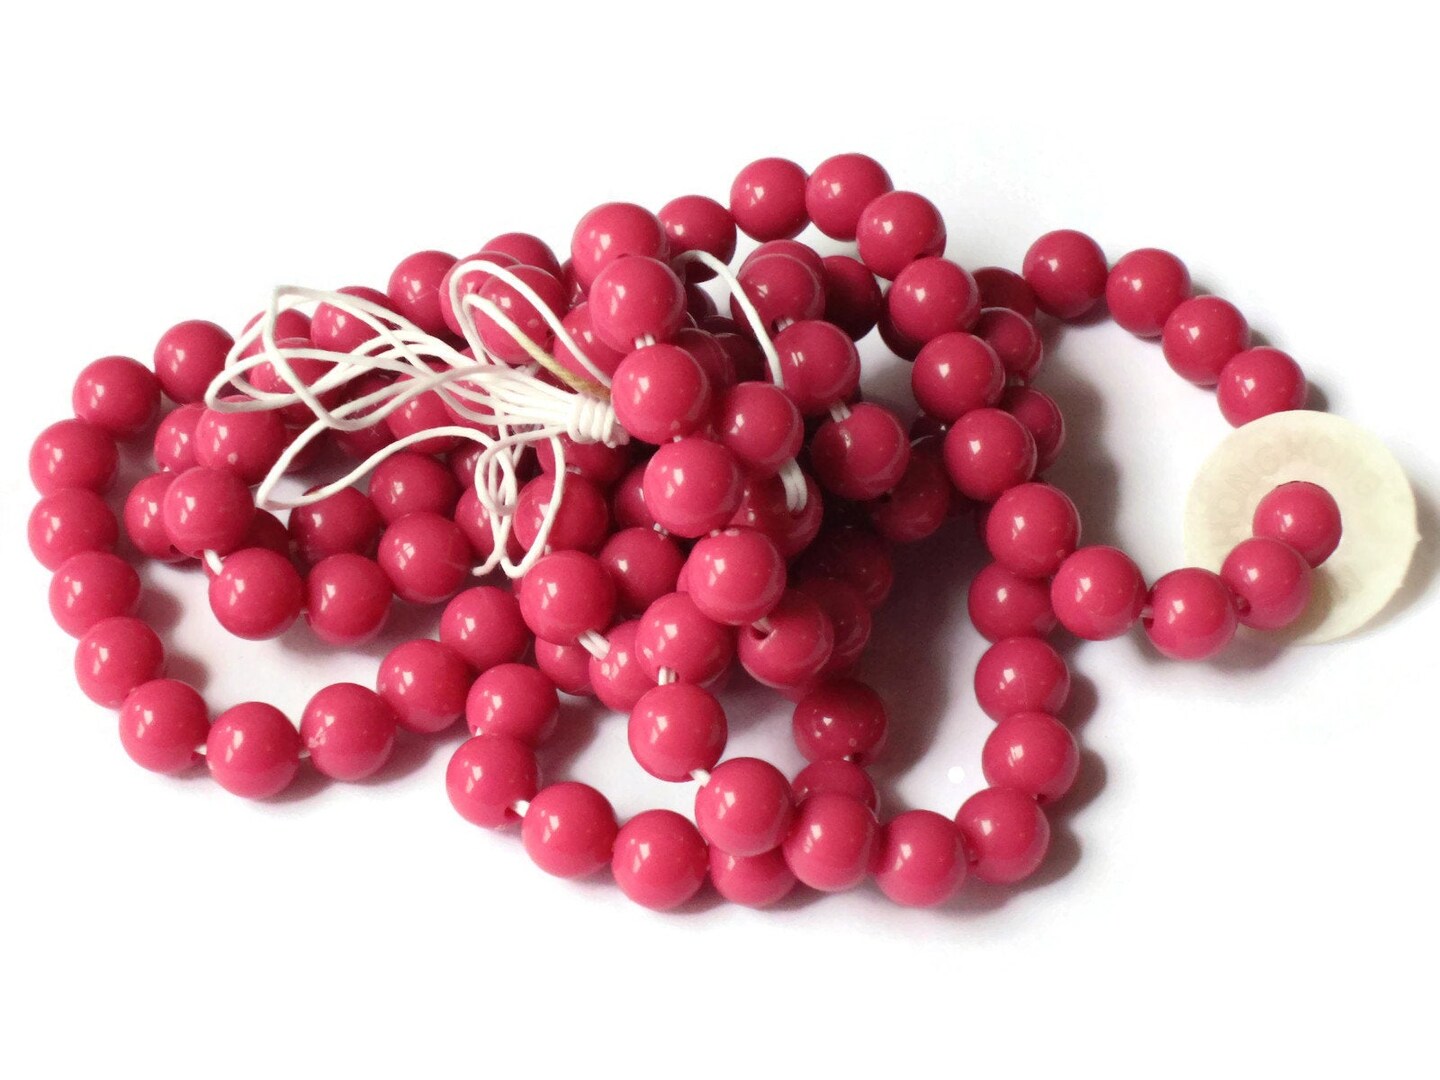 135 6mm Round Pink Vintage Plastic Beads 31 Inch Full Strand Ball Beads Acrylic Beads